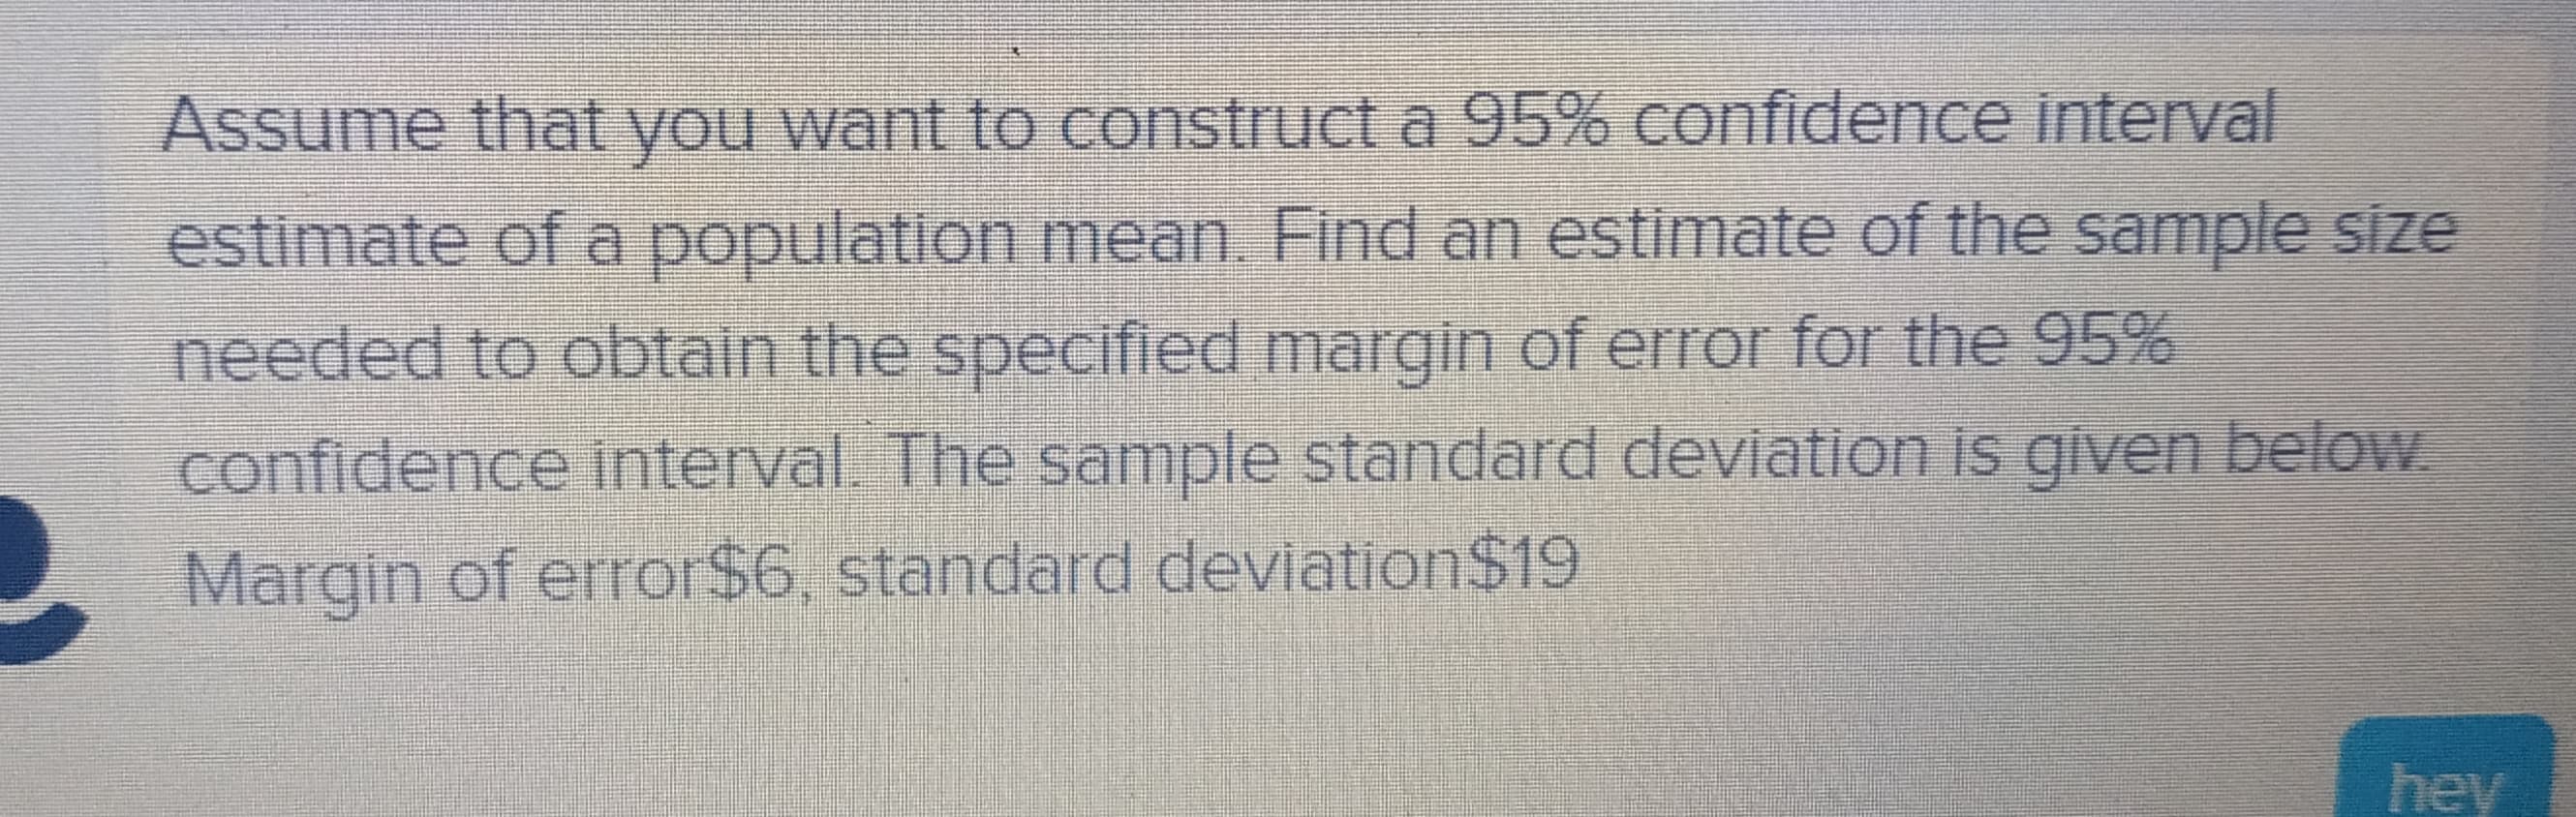 Assume that you want to construct a 95% confidence interval
estimate of a population mean. Find an estimate of the sample size
needed to obtain the specified margin of error for the 95%
confidence interval. The sample standard deviation is given below.
Margin of error$6, standard deviation$19
